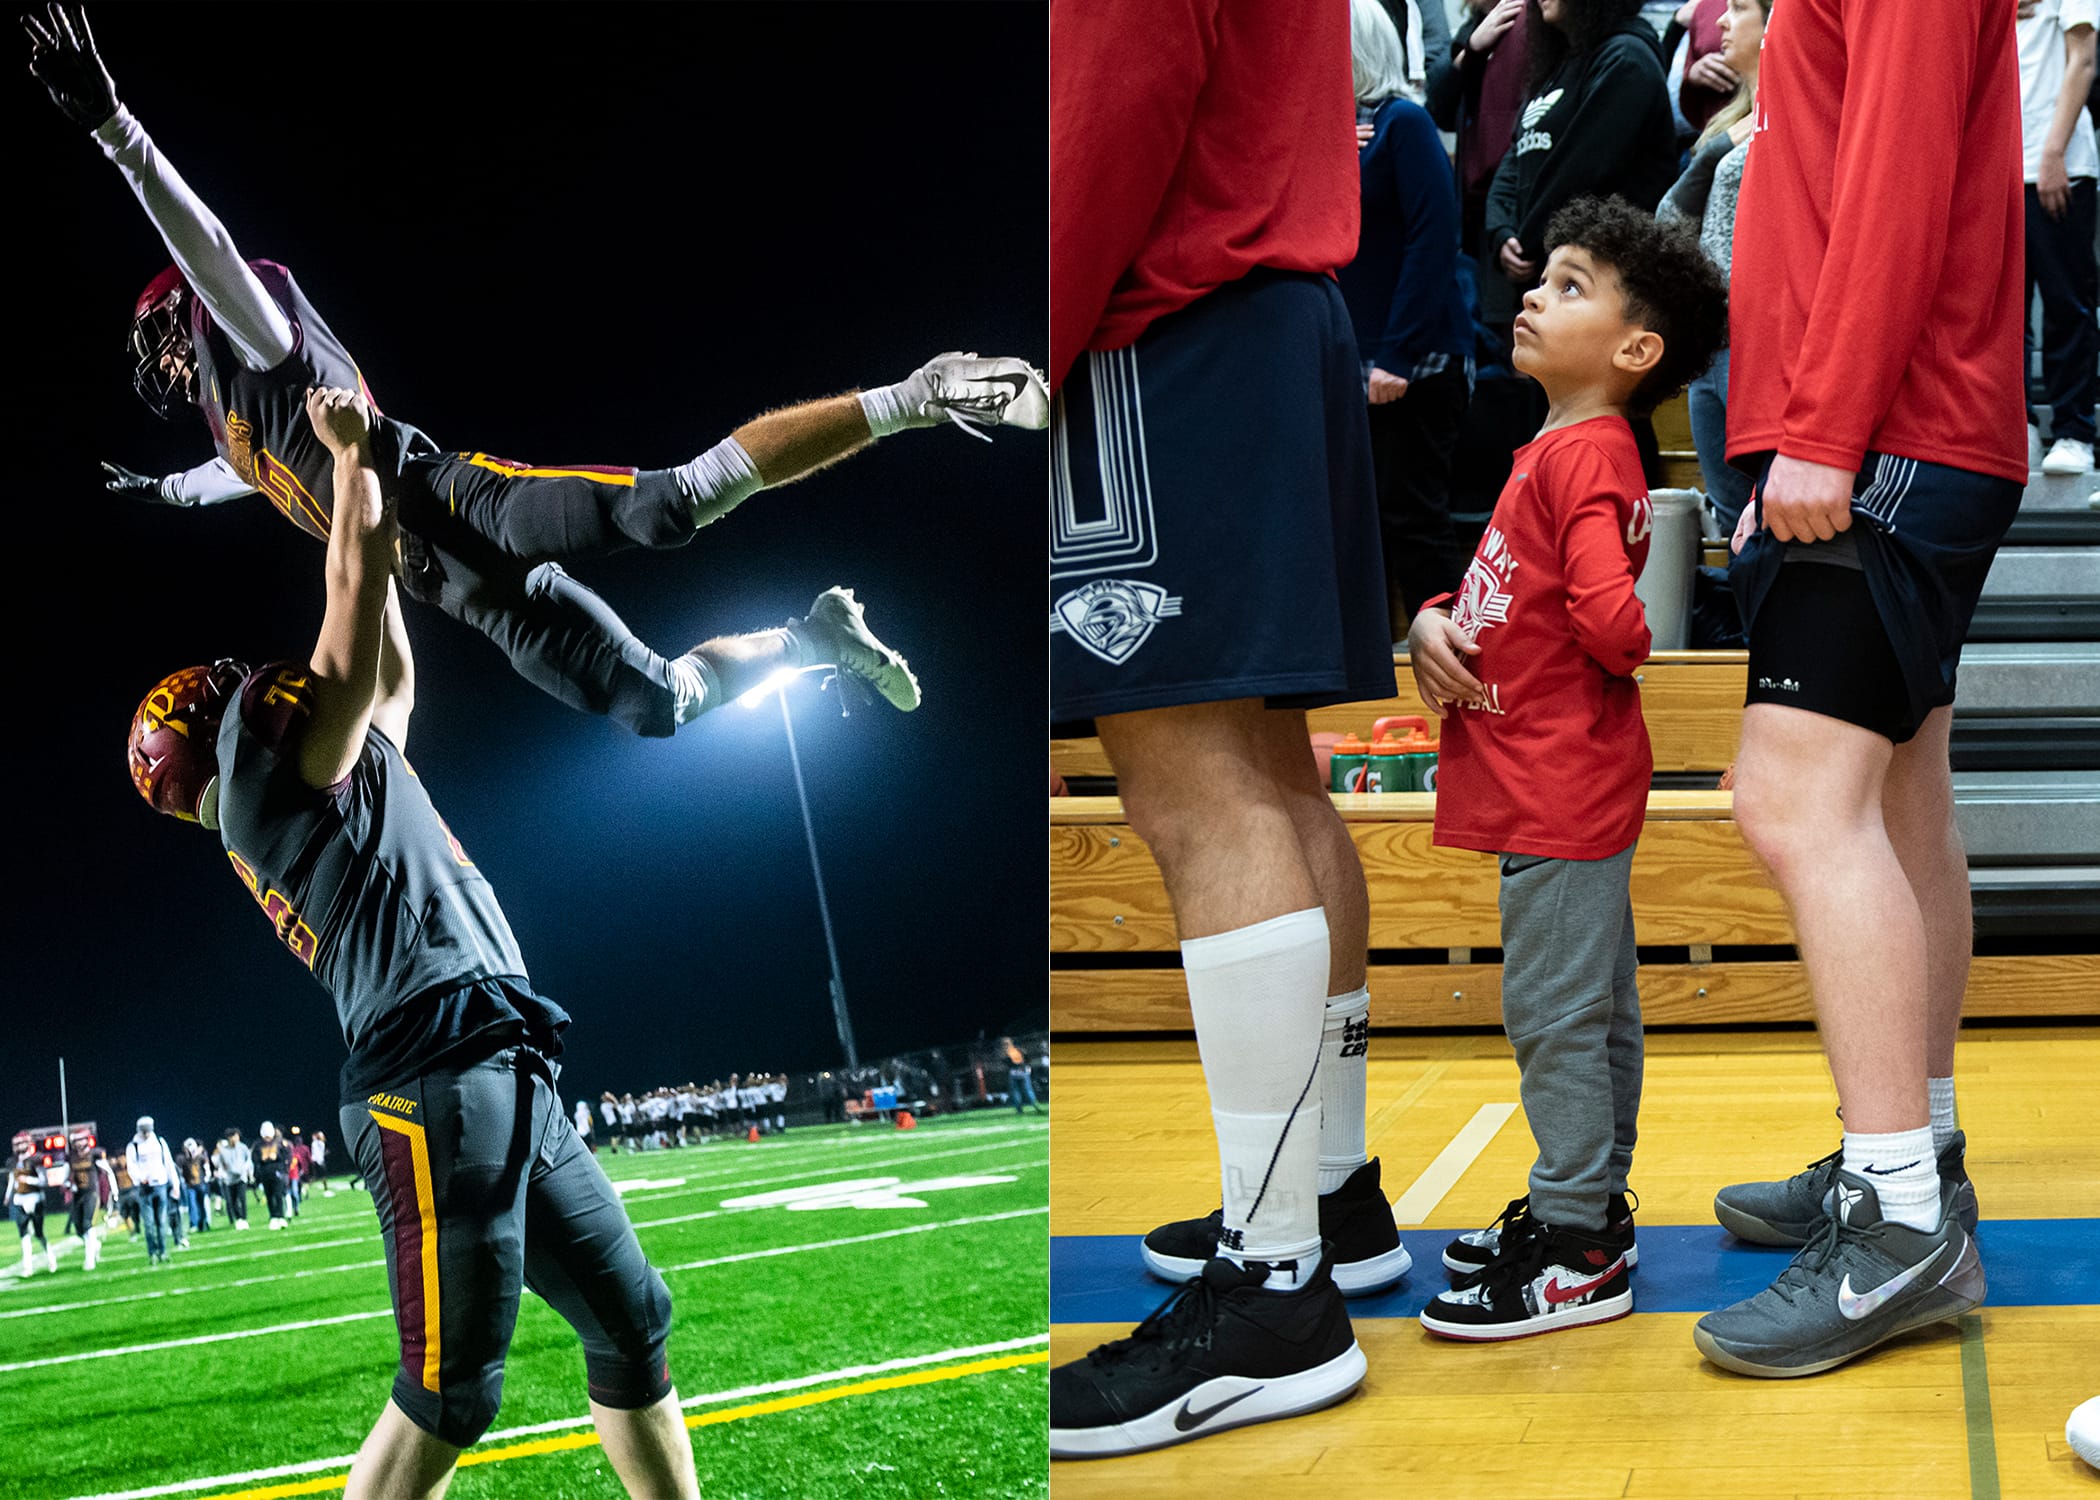 "Victory Lift" matches up with "The Littlest Knight" in the final of Picture Pick 'Em